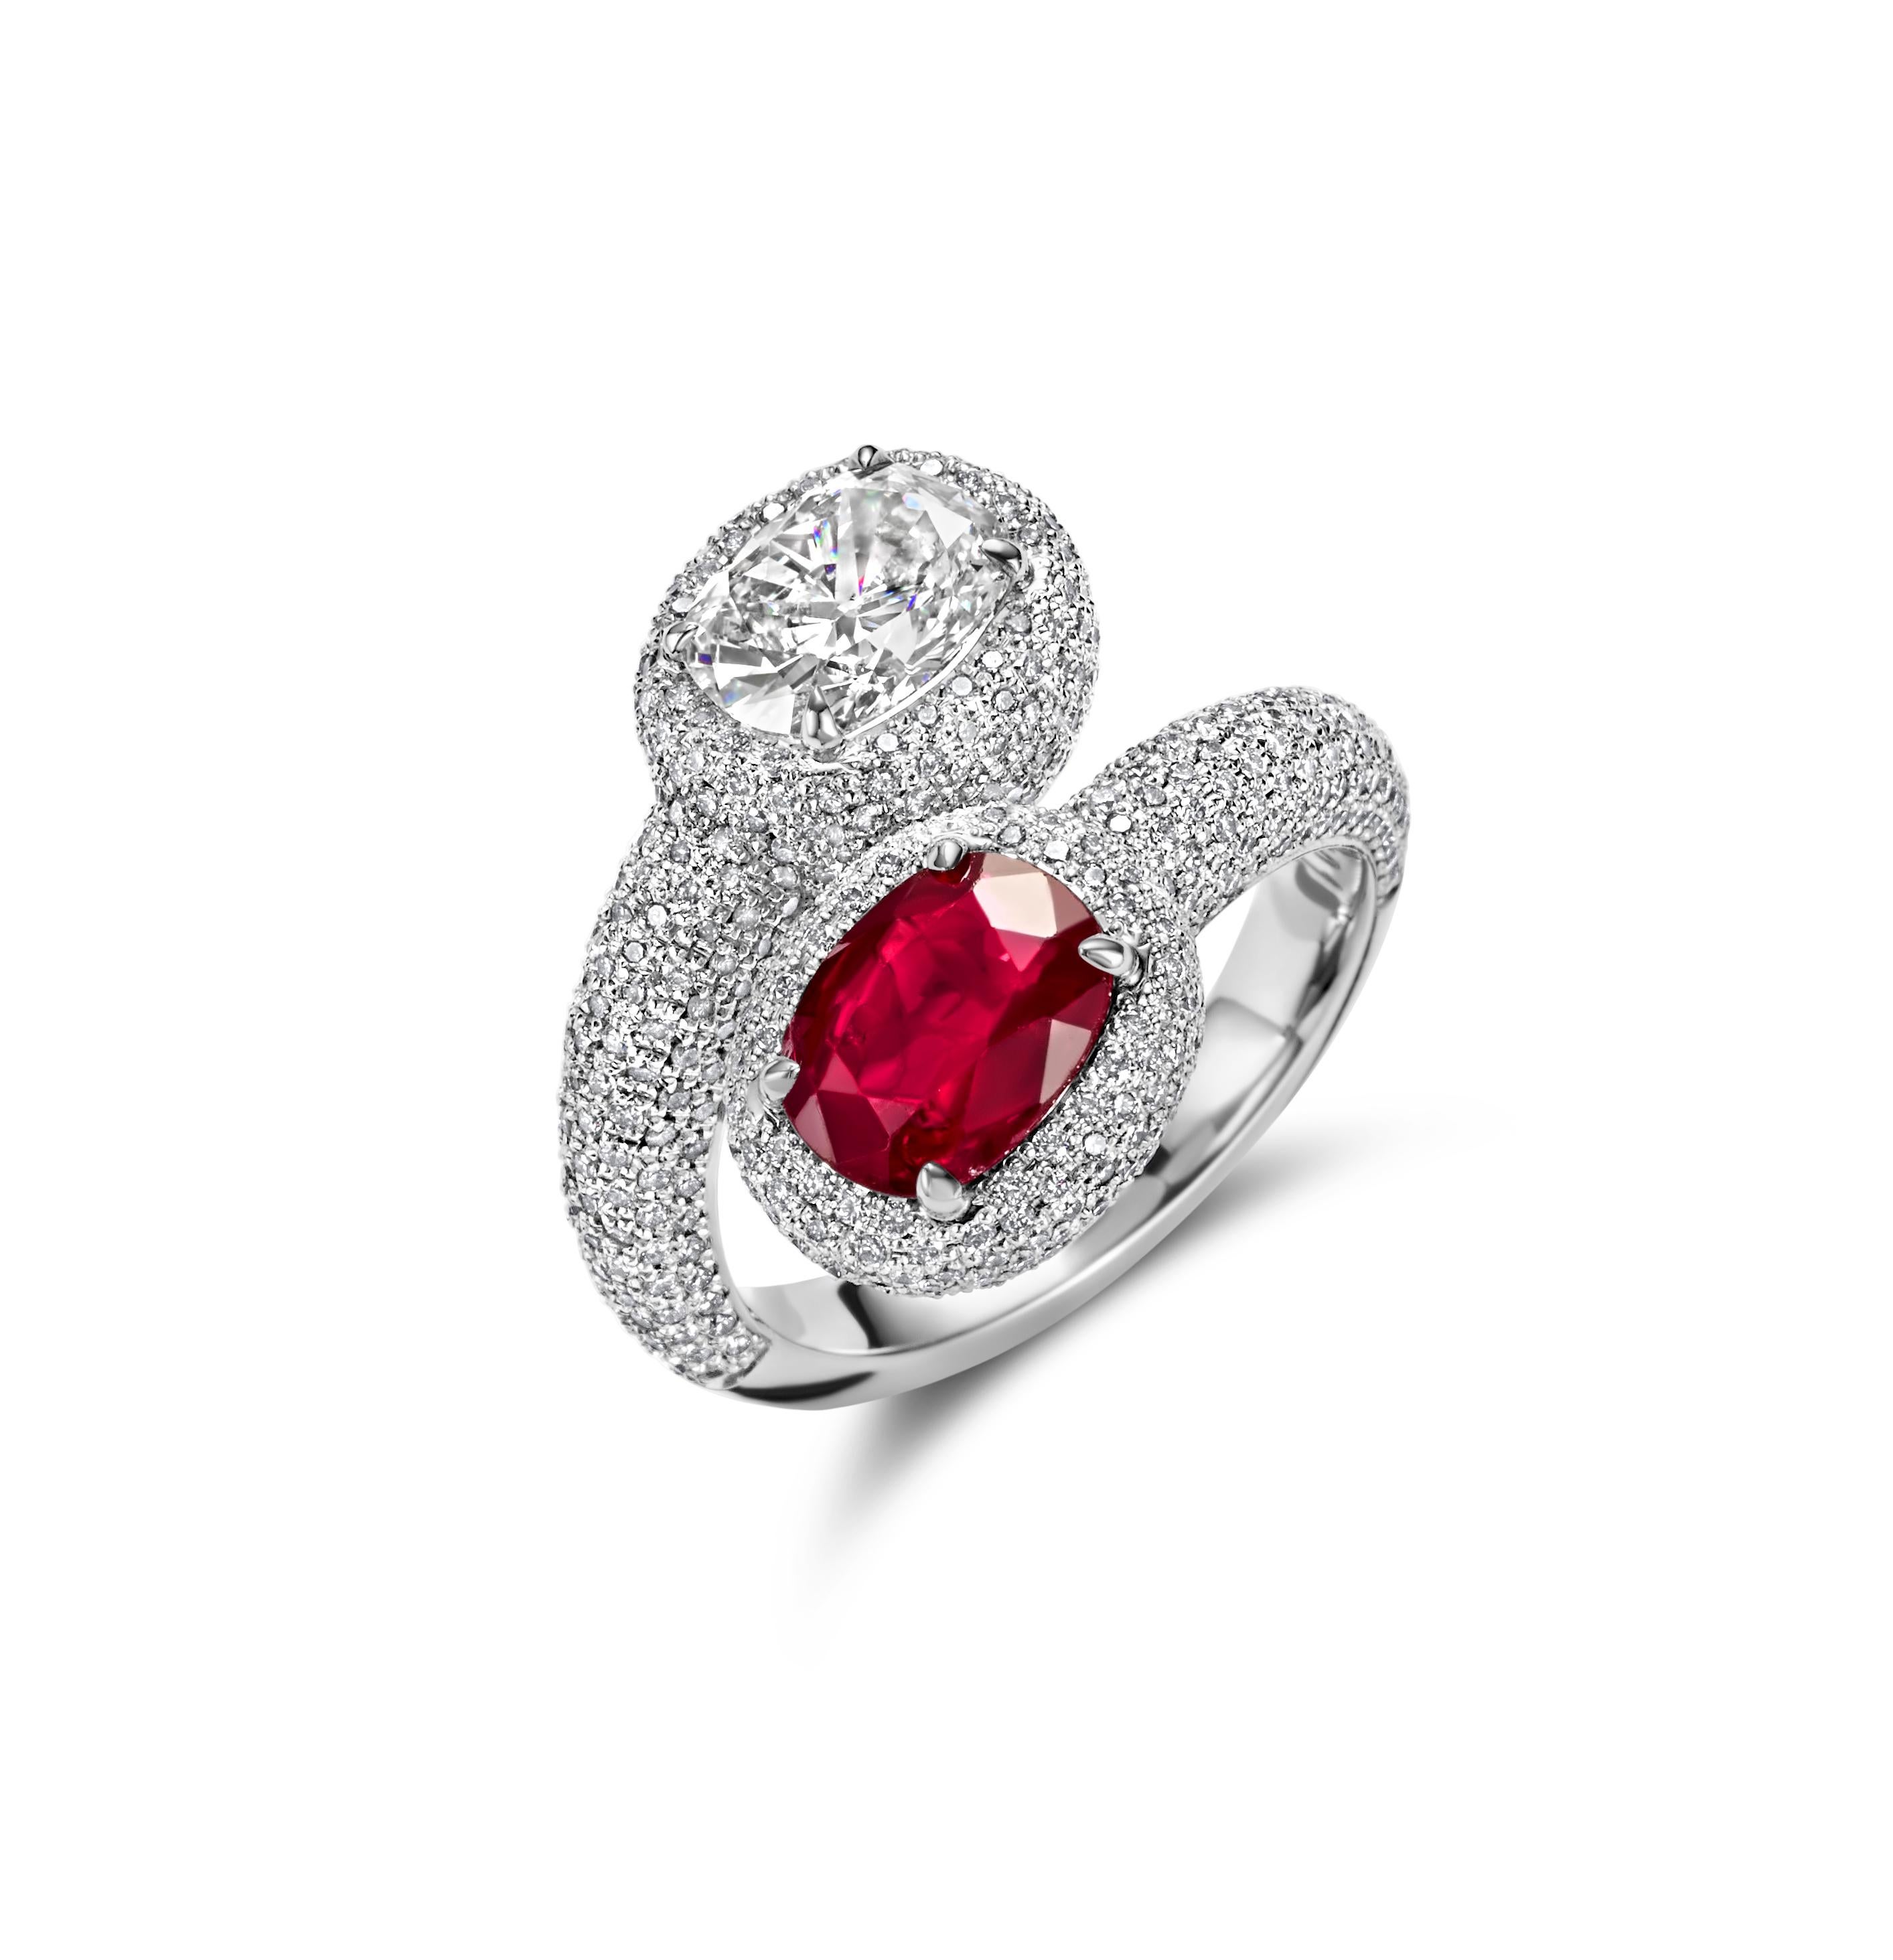 Gorgeous Platinum Toi et Moi Ring With Ruby and Diamond

Ruby: Cushion shape Siam ruby 2.40ct, intense red, Comes with Carat Gem Lab certificate

Diamonds: Cushion shape diamond 1.55ct G SI1 Comes with a  HRD Antwerp certificate

Material: 950